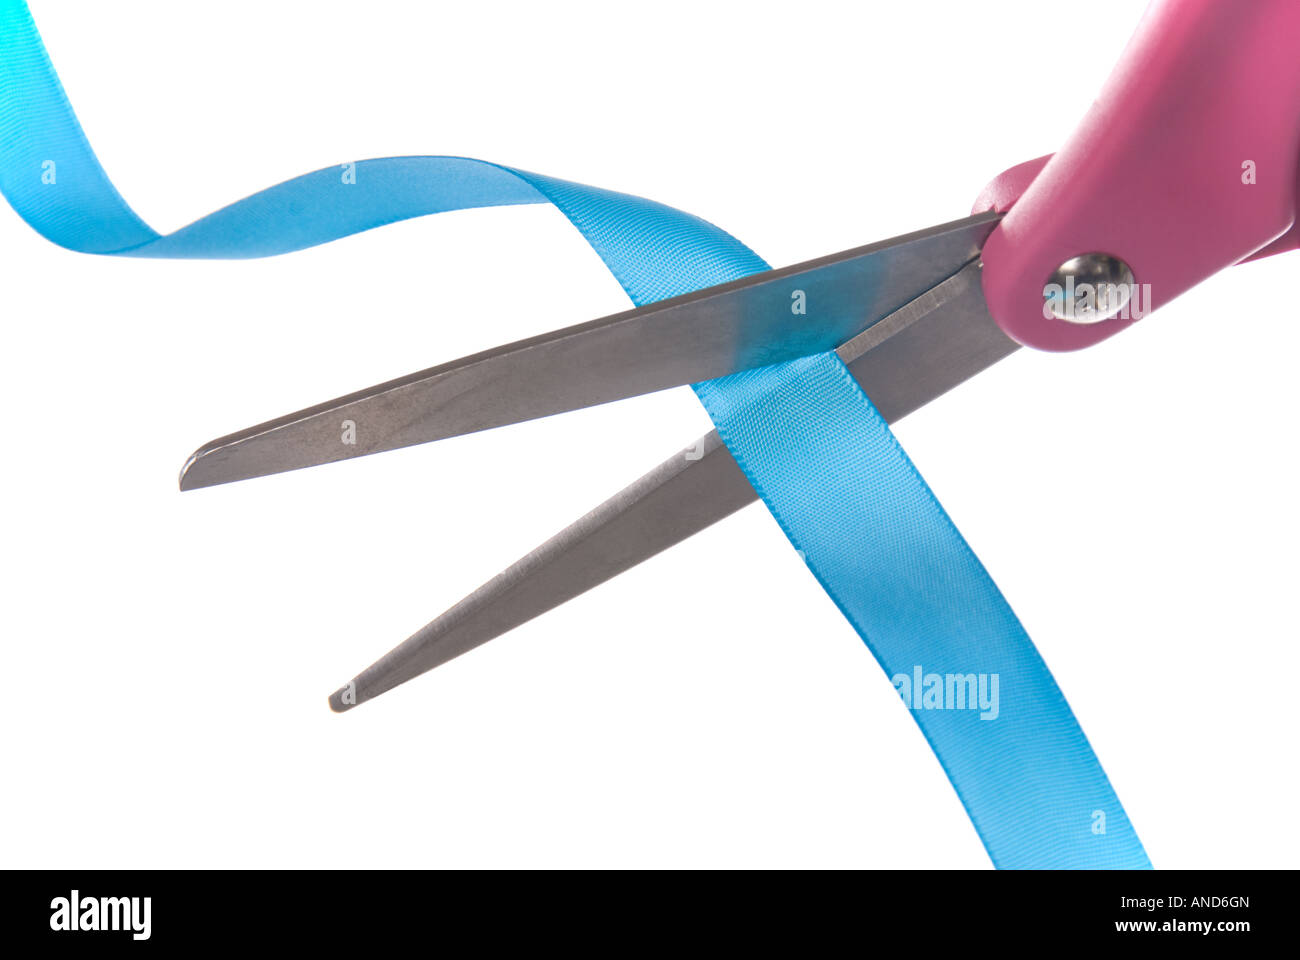 Close up image of an isolated pair of scissors cutting into blue ribbon Stock Photo